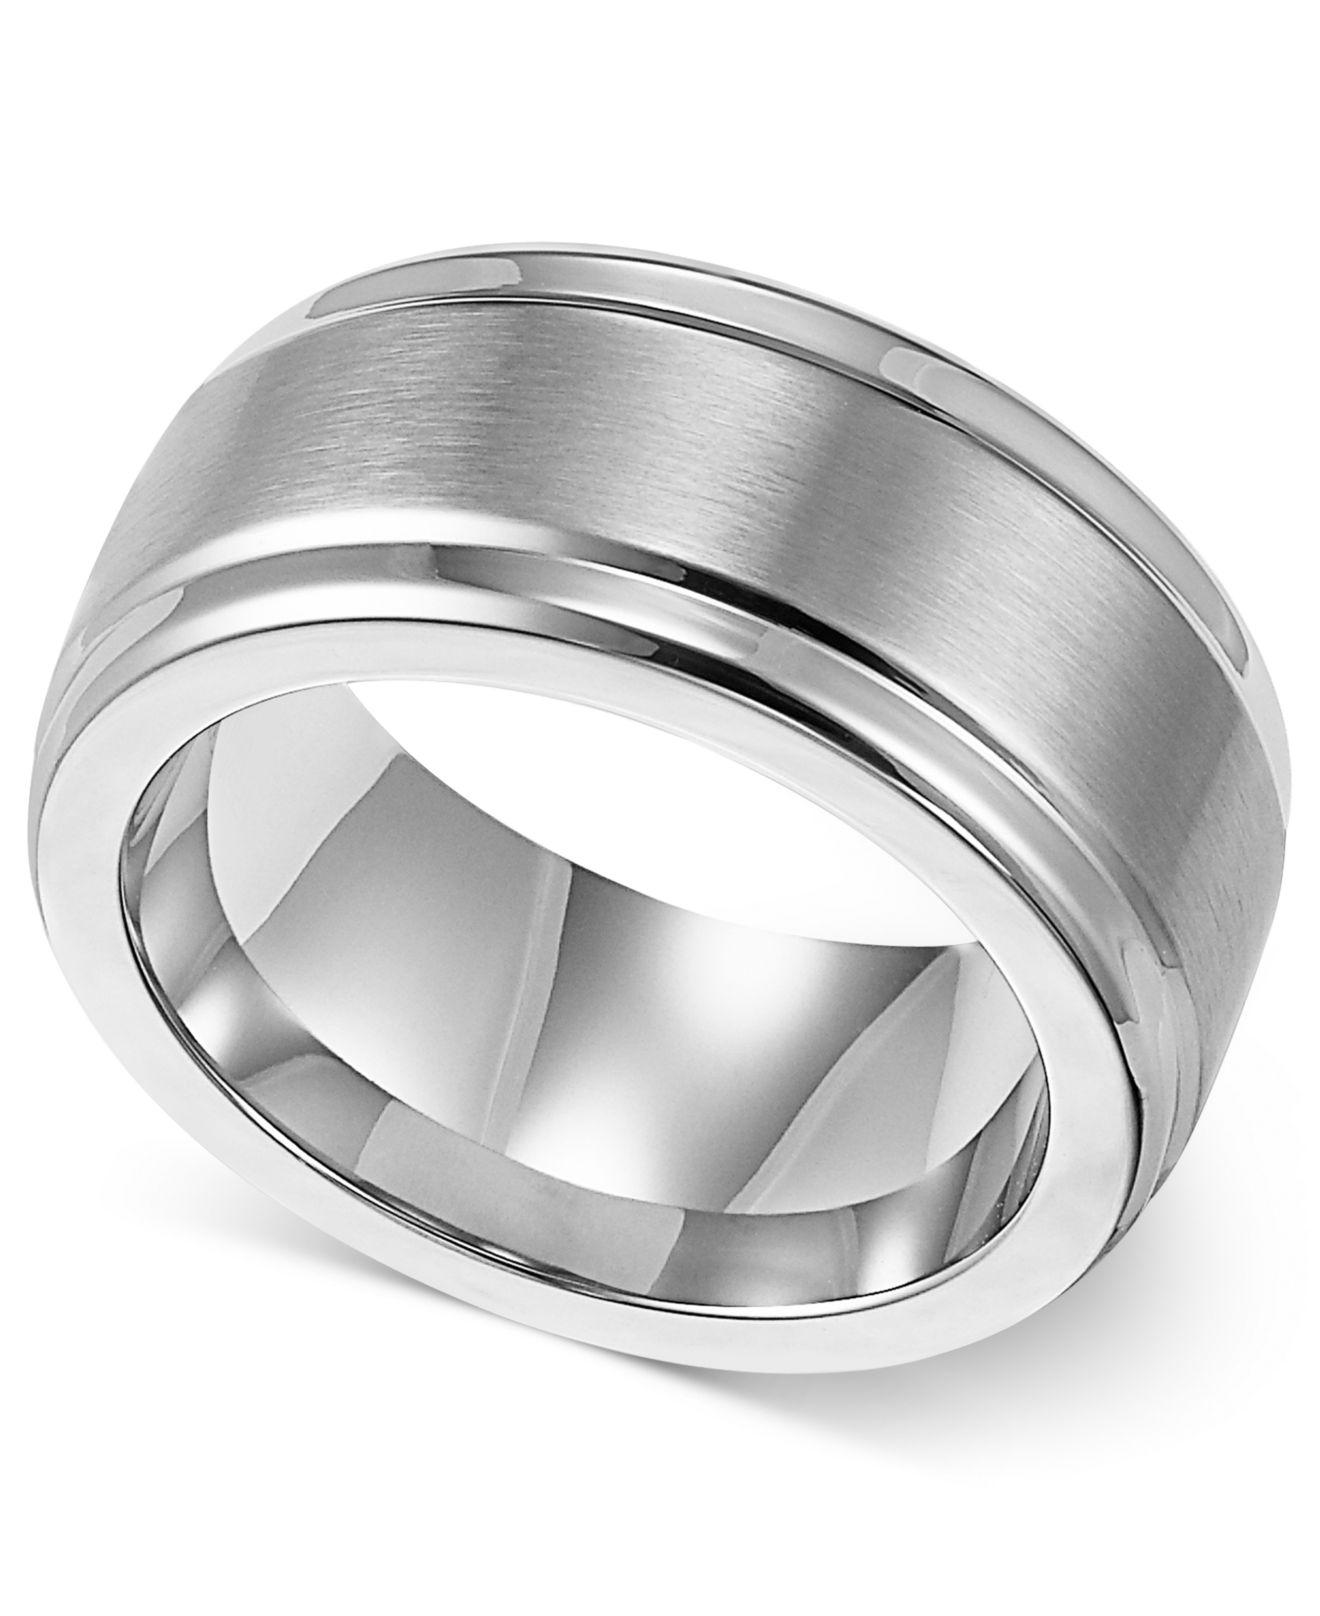 Lyst Triton Men's Stainless Steel Ring, 9mm Wedding Band